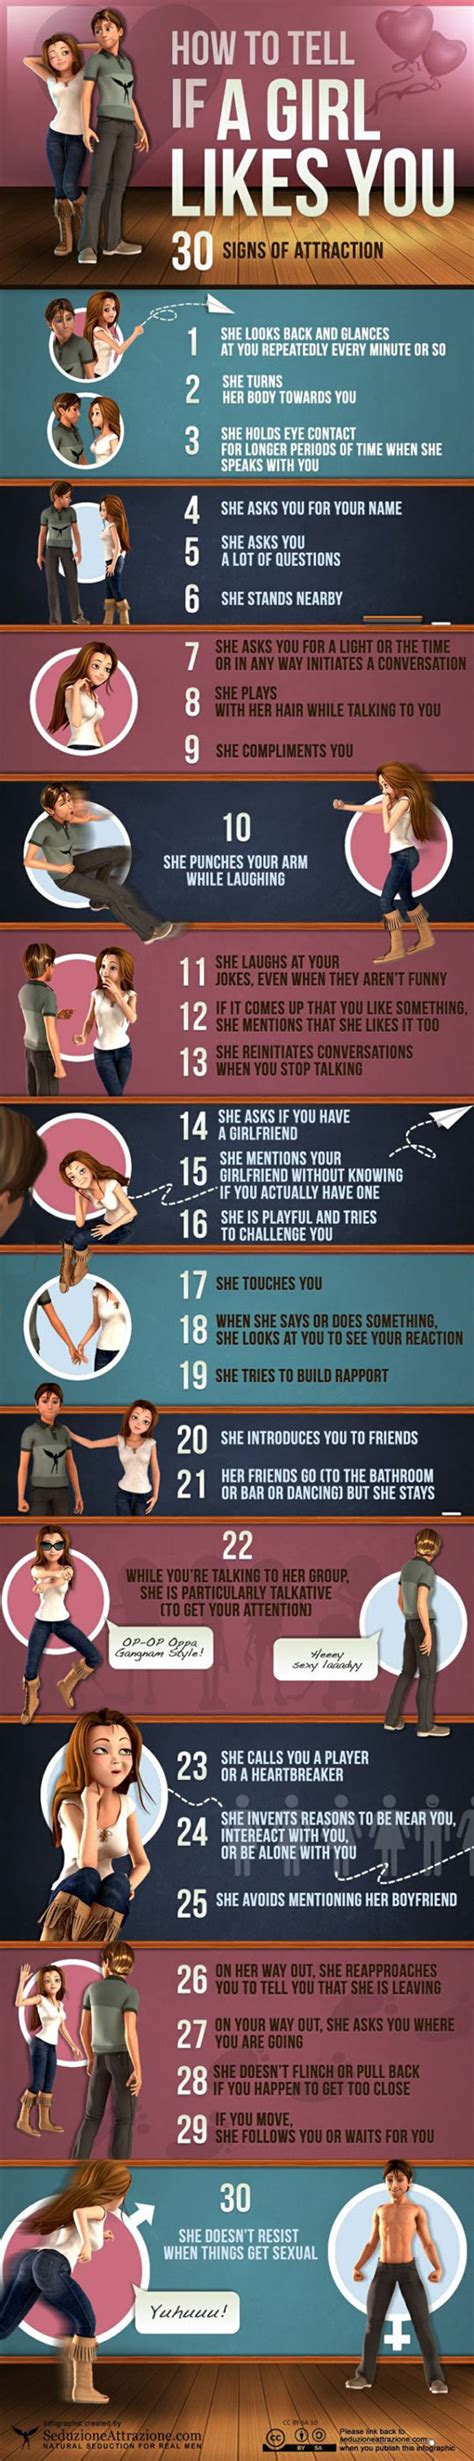 Try paying attention to his body language and the way he acts when you're around, as well as how if a guy ever makes you feel uncomfortable by touching you or pressing close to you, firmly tell him to. How to tell if a girl likes you. | Signs of attraction, Body language attraction, A guy like you